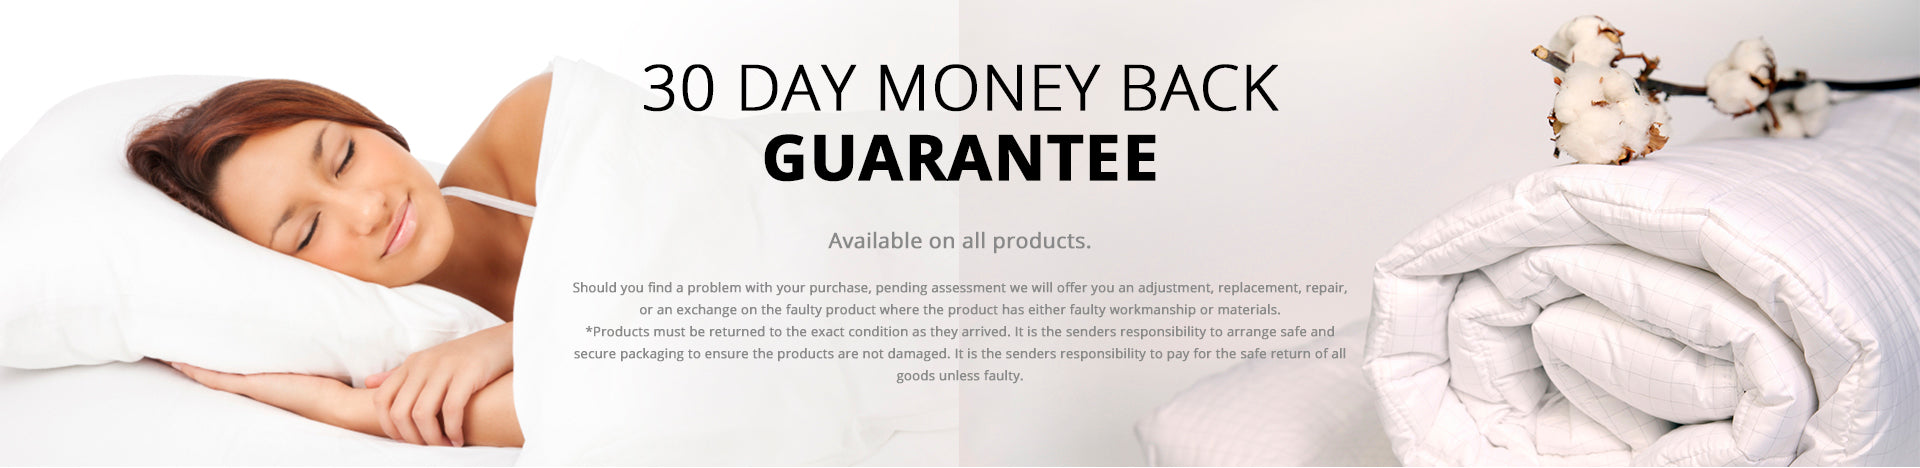 Supreme Quilts - 30 day money back guarantee